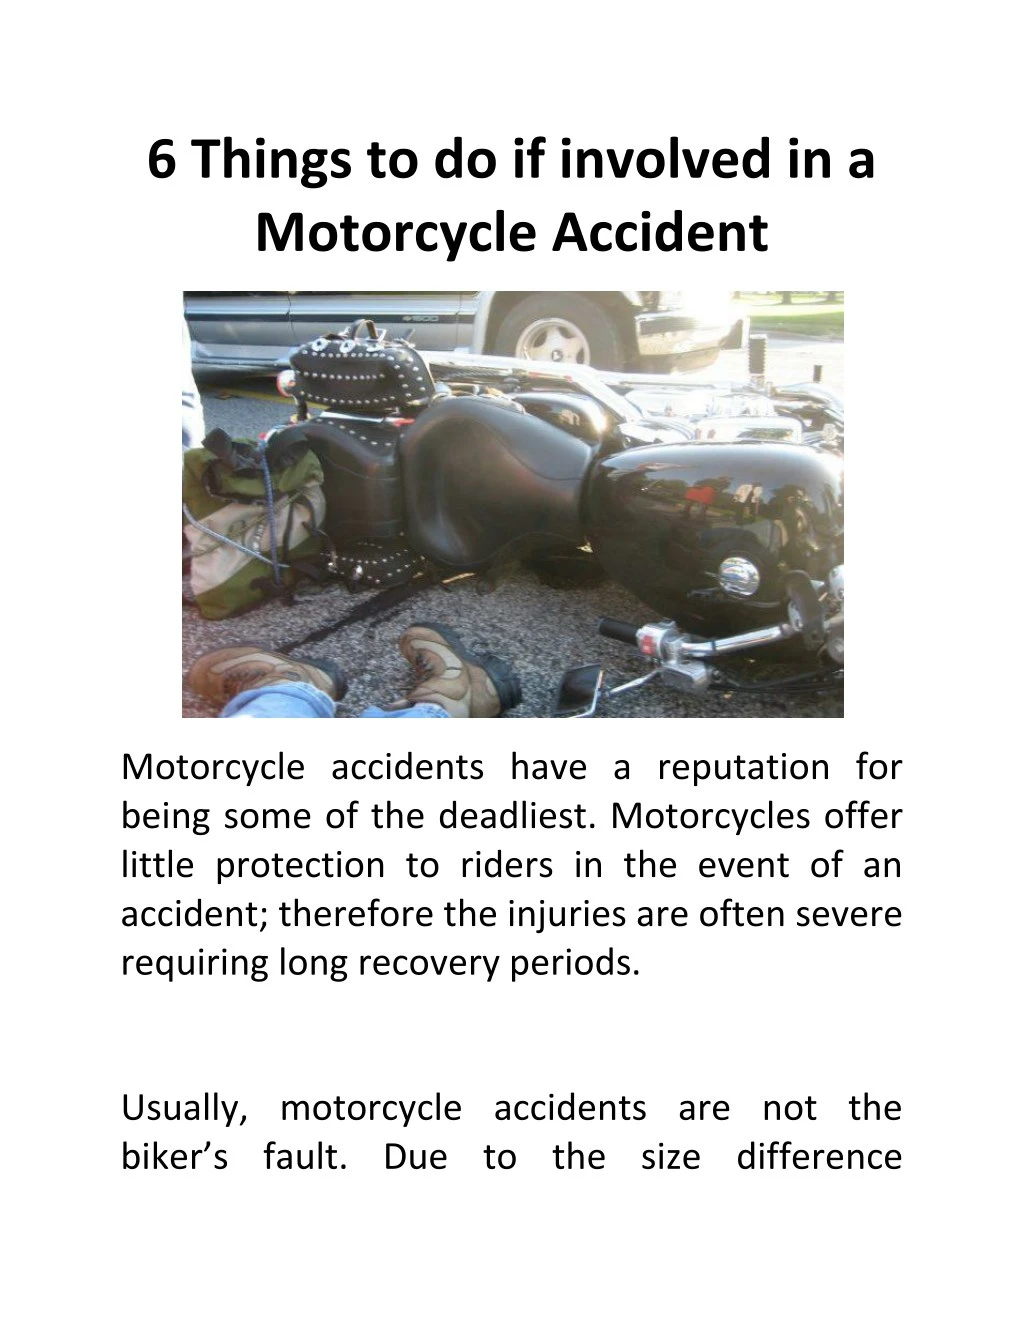 6 things to do if involved in a motorcycle